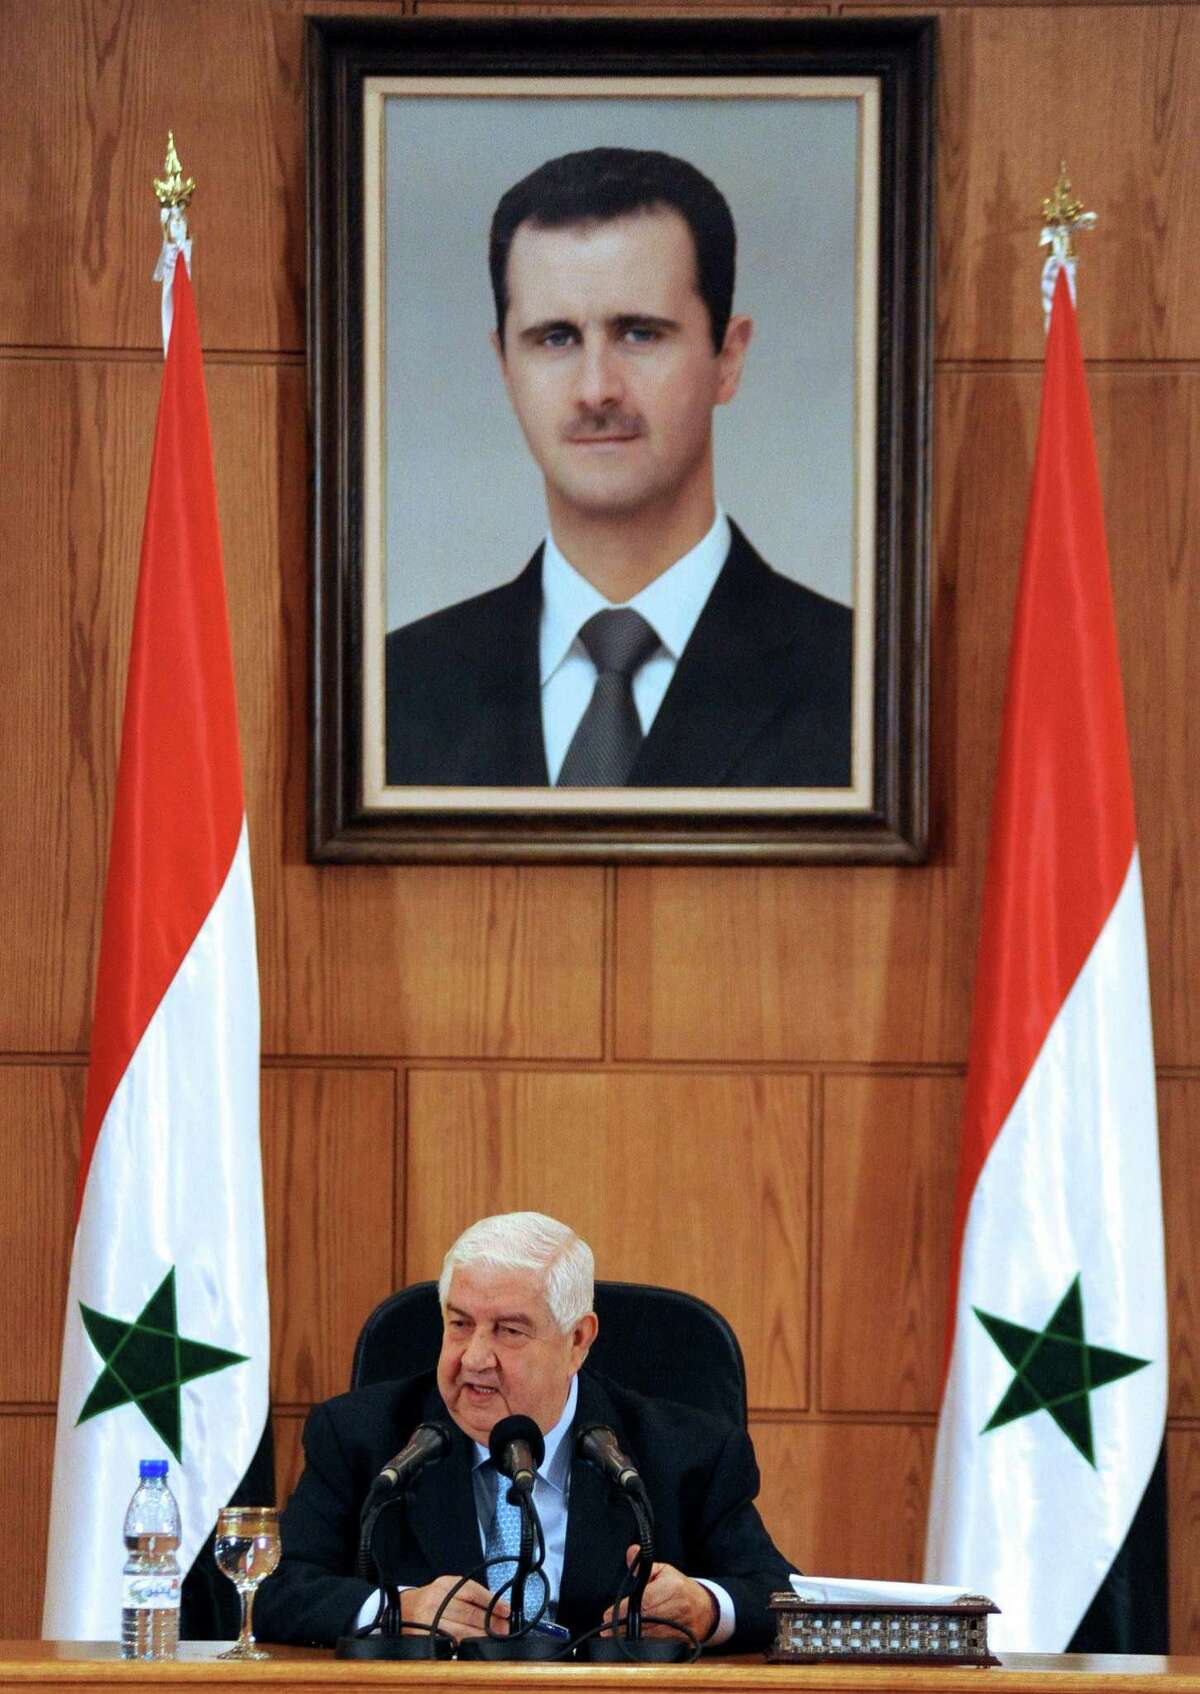 Syrian Foreign Minister Walid Muallem, shown under a portrait of President Bashar Assad, said Tuesday in Damascus that the government has defenses that would “surprise” the world.